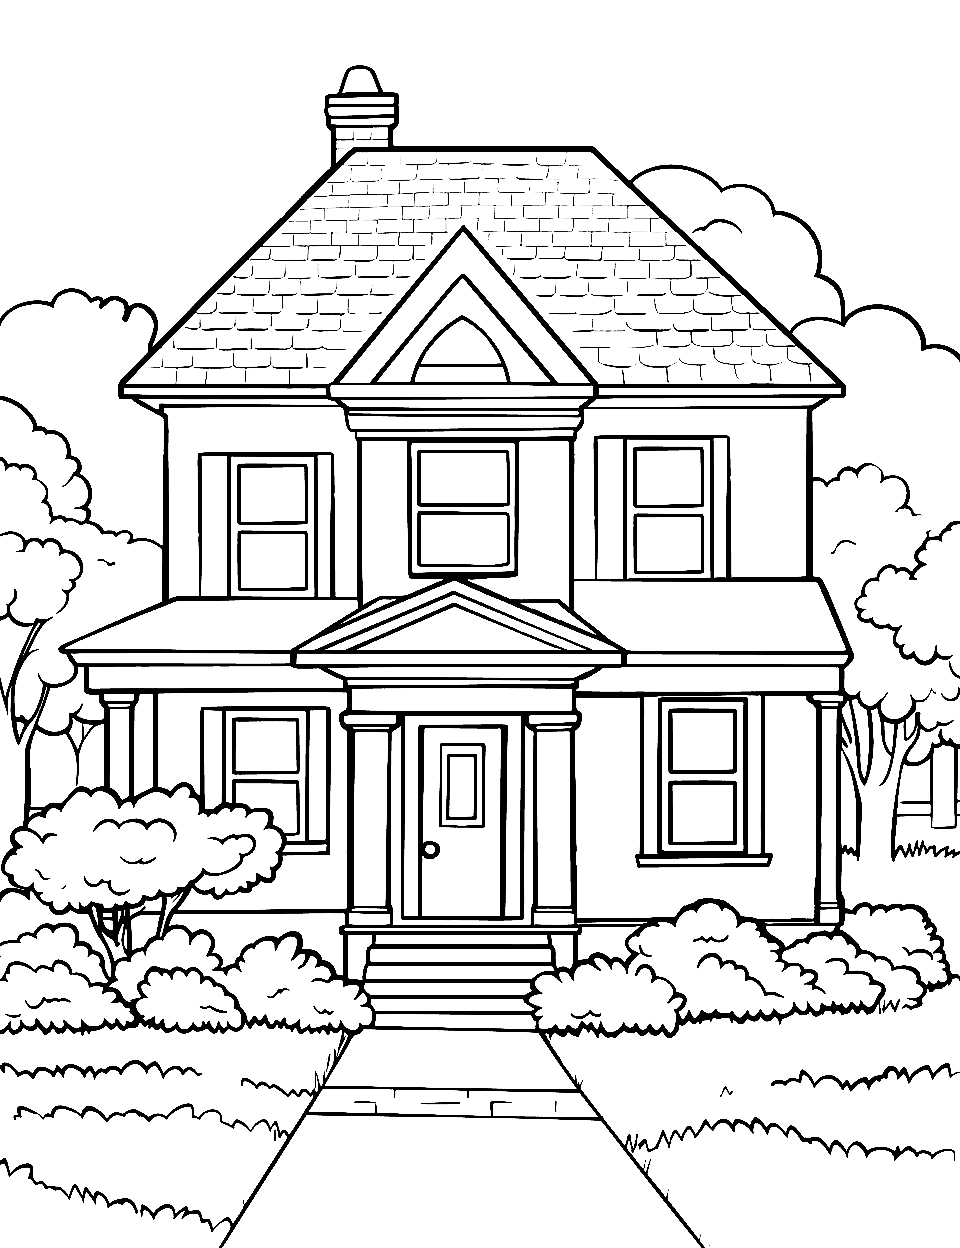 Expansive Big Abode Coloring Page - A large house with a spacious yard.